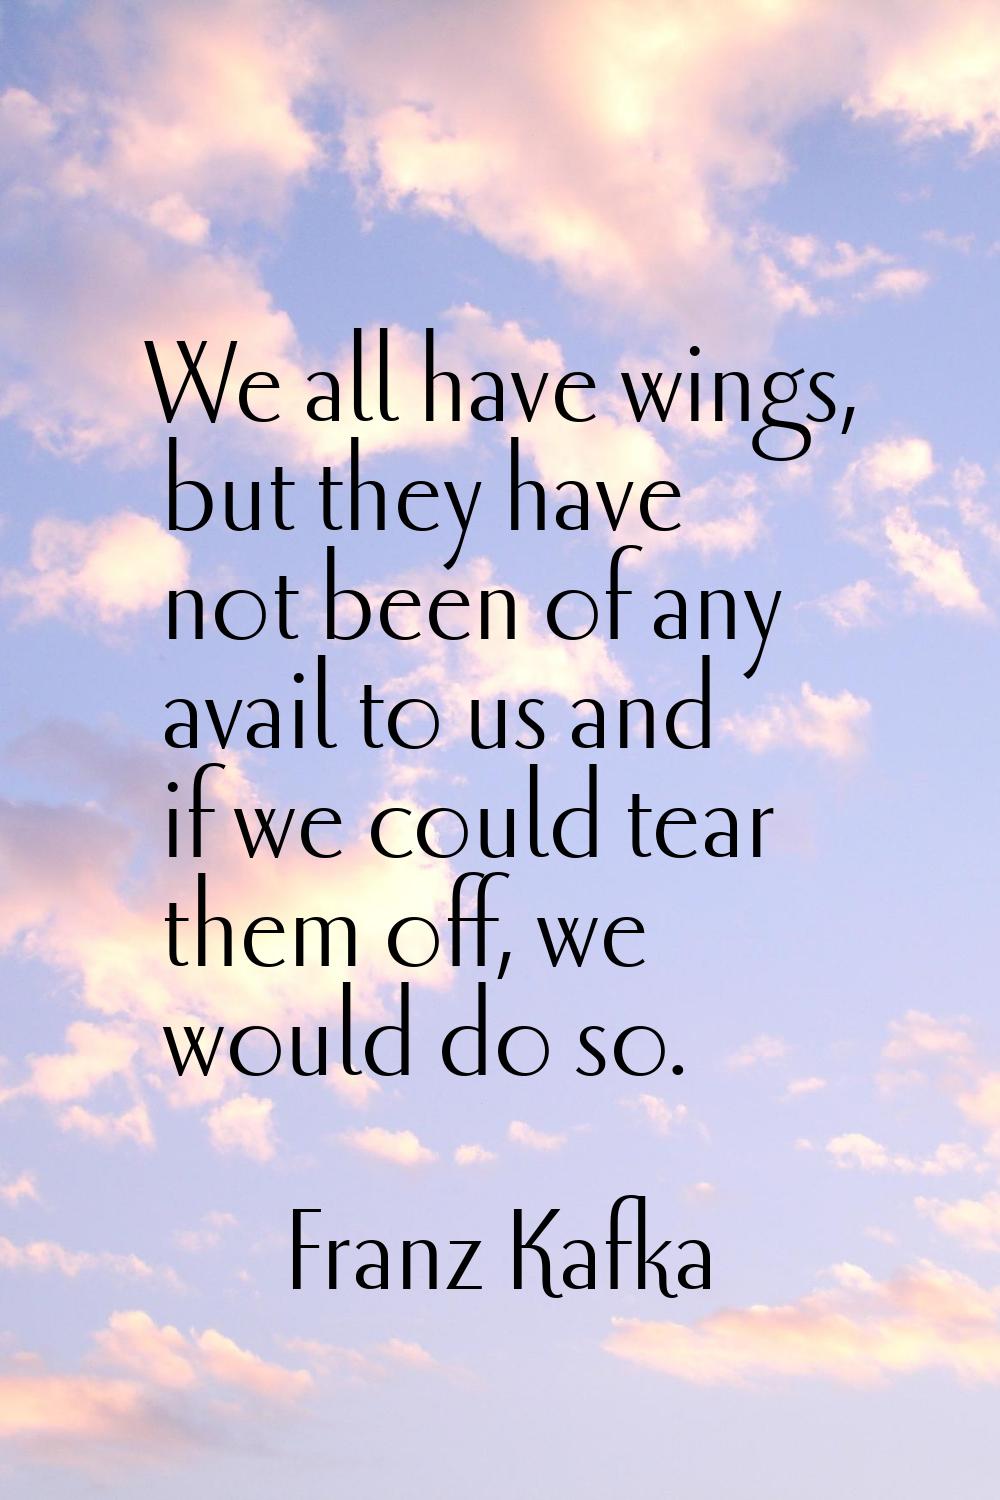 We all have wings, but they have not been of any avail to us and if we could tear them off, we woul